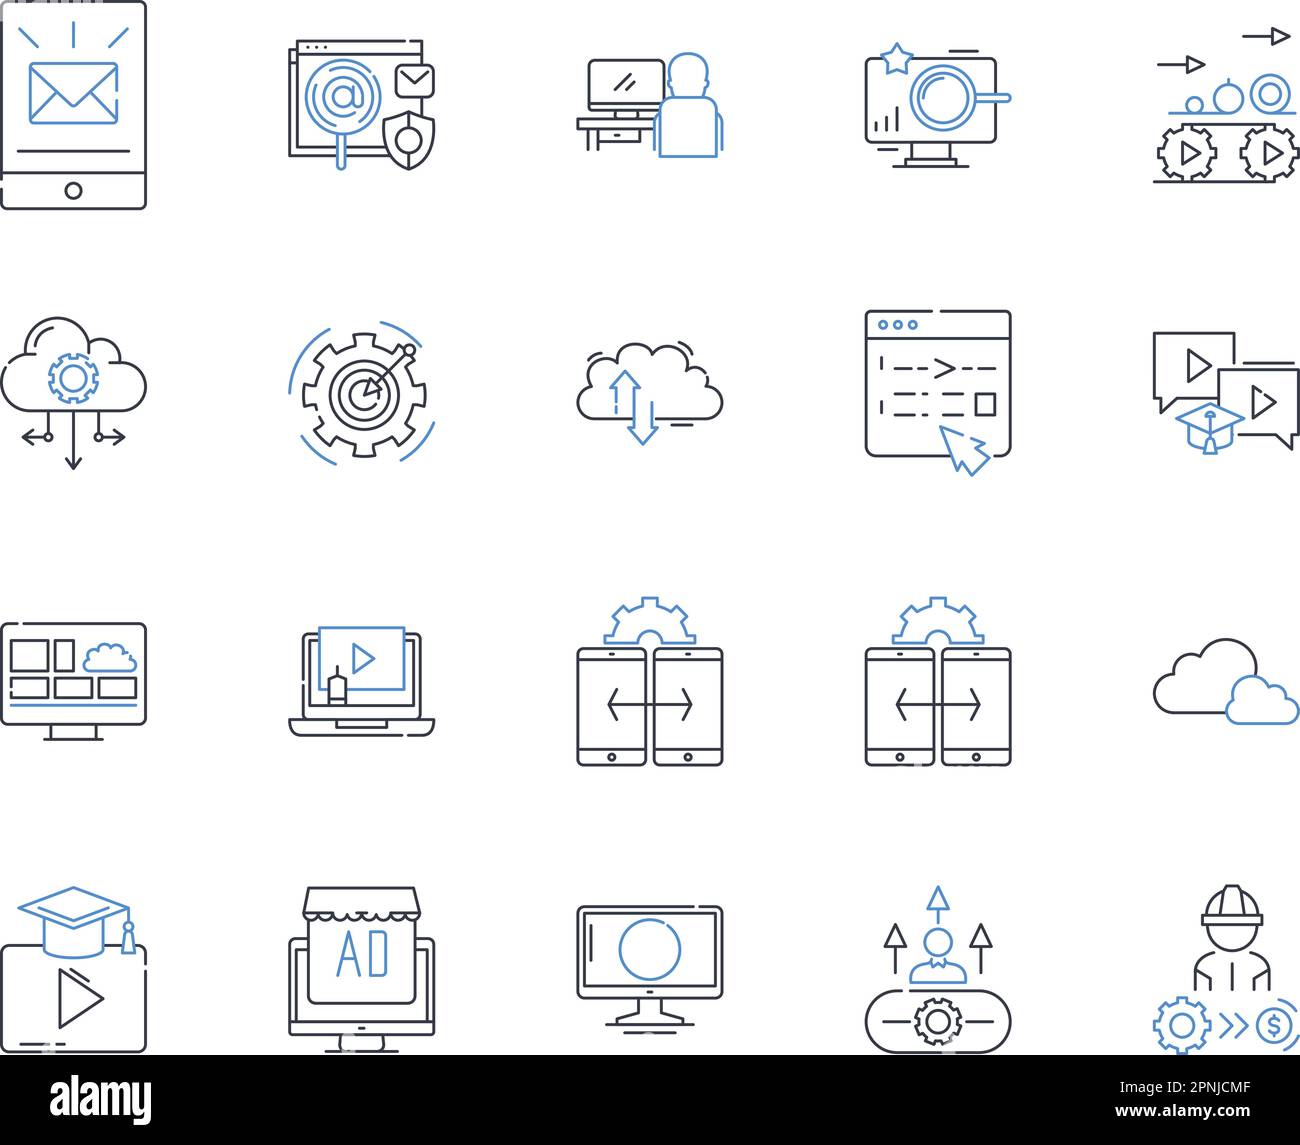 Mobile phs line icons collection. Smartph, App, Text, Call, Camera, Gaming, Data vector and linear illustration. Navigation,GPS,Social outline signs Stock Vector